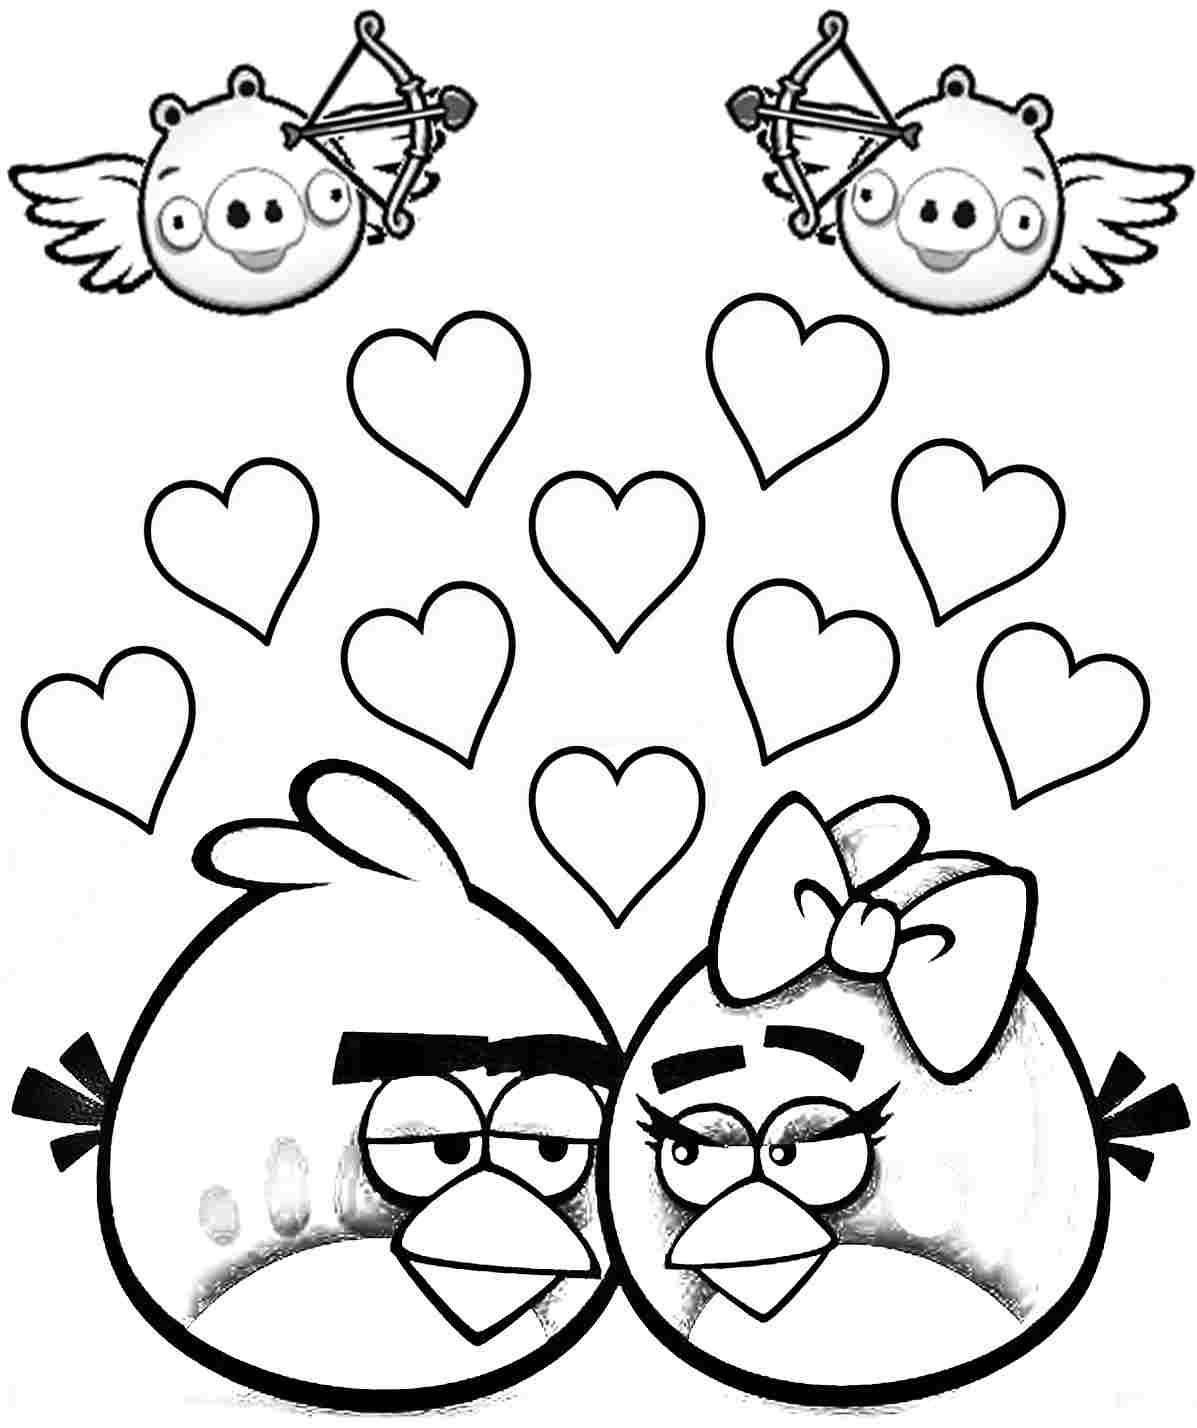 Boy Valentine Coloring Pages
 Valentines Day Coloring Pages For Boys at GetColorings